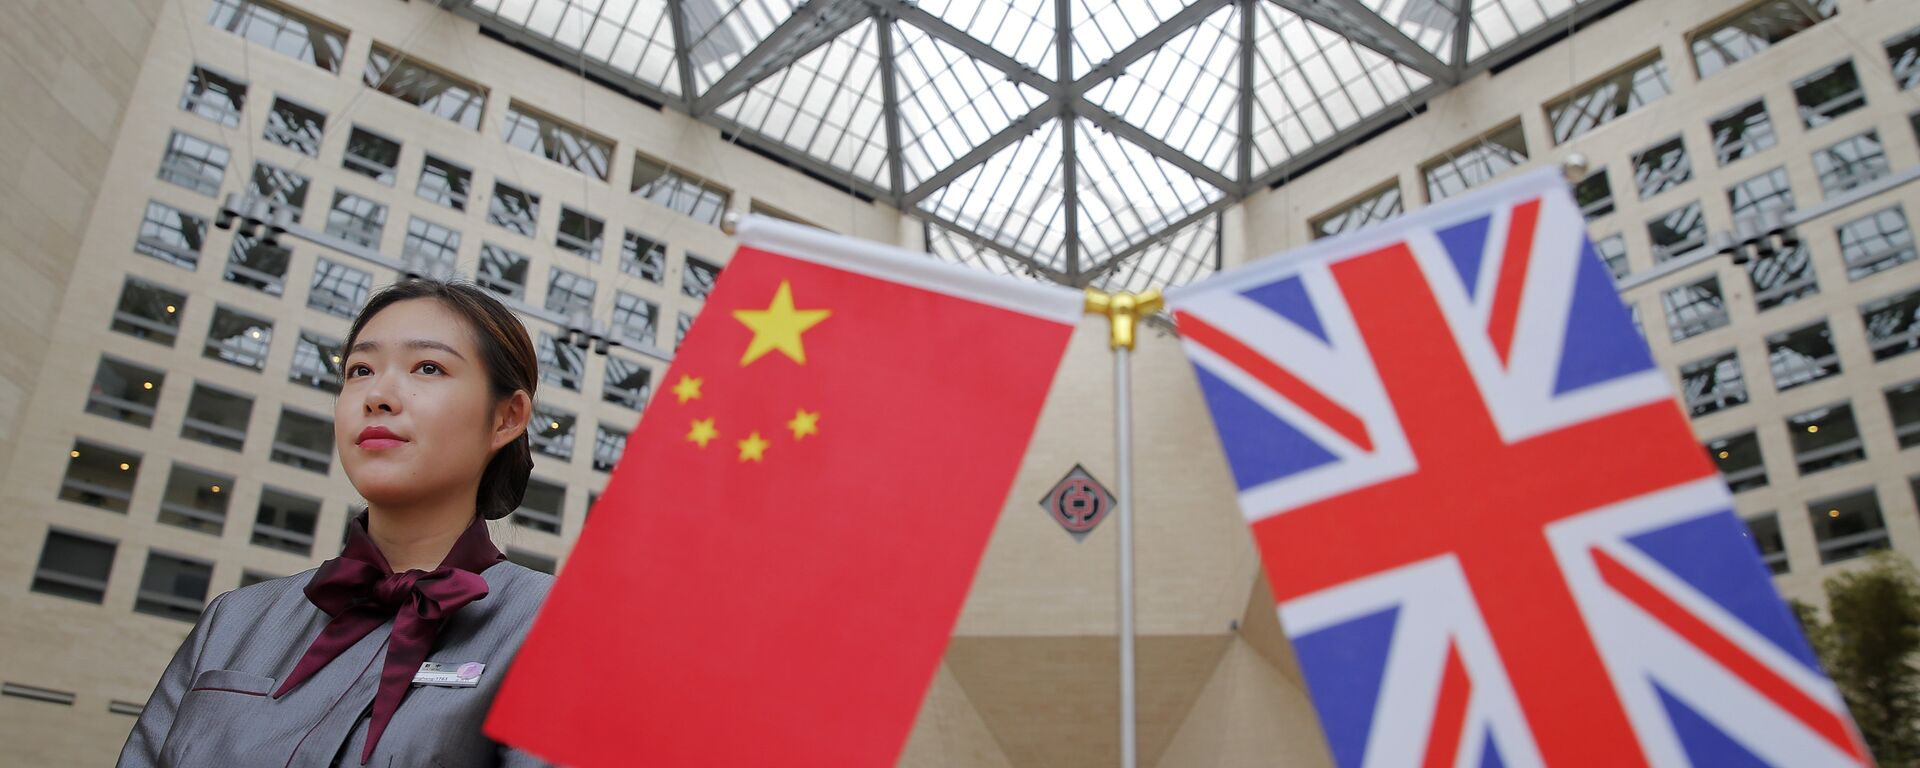 A member of staff stands behind flags as officials arrive for the UK-China High Level Financial Services Roundtable at the Bank of China head office building in Beijing on July 22, 2016 - Sputnik International, 1920, 03.02.2021